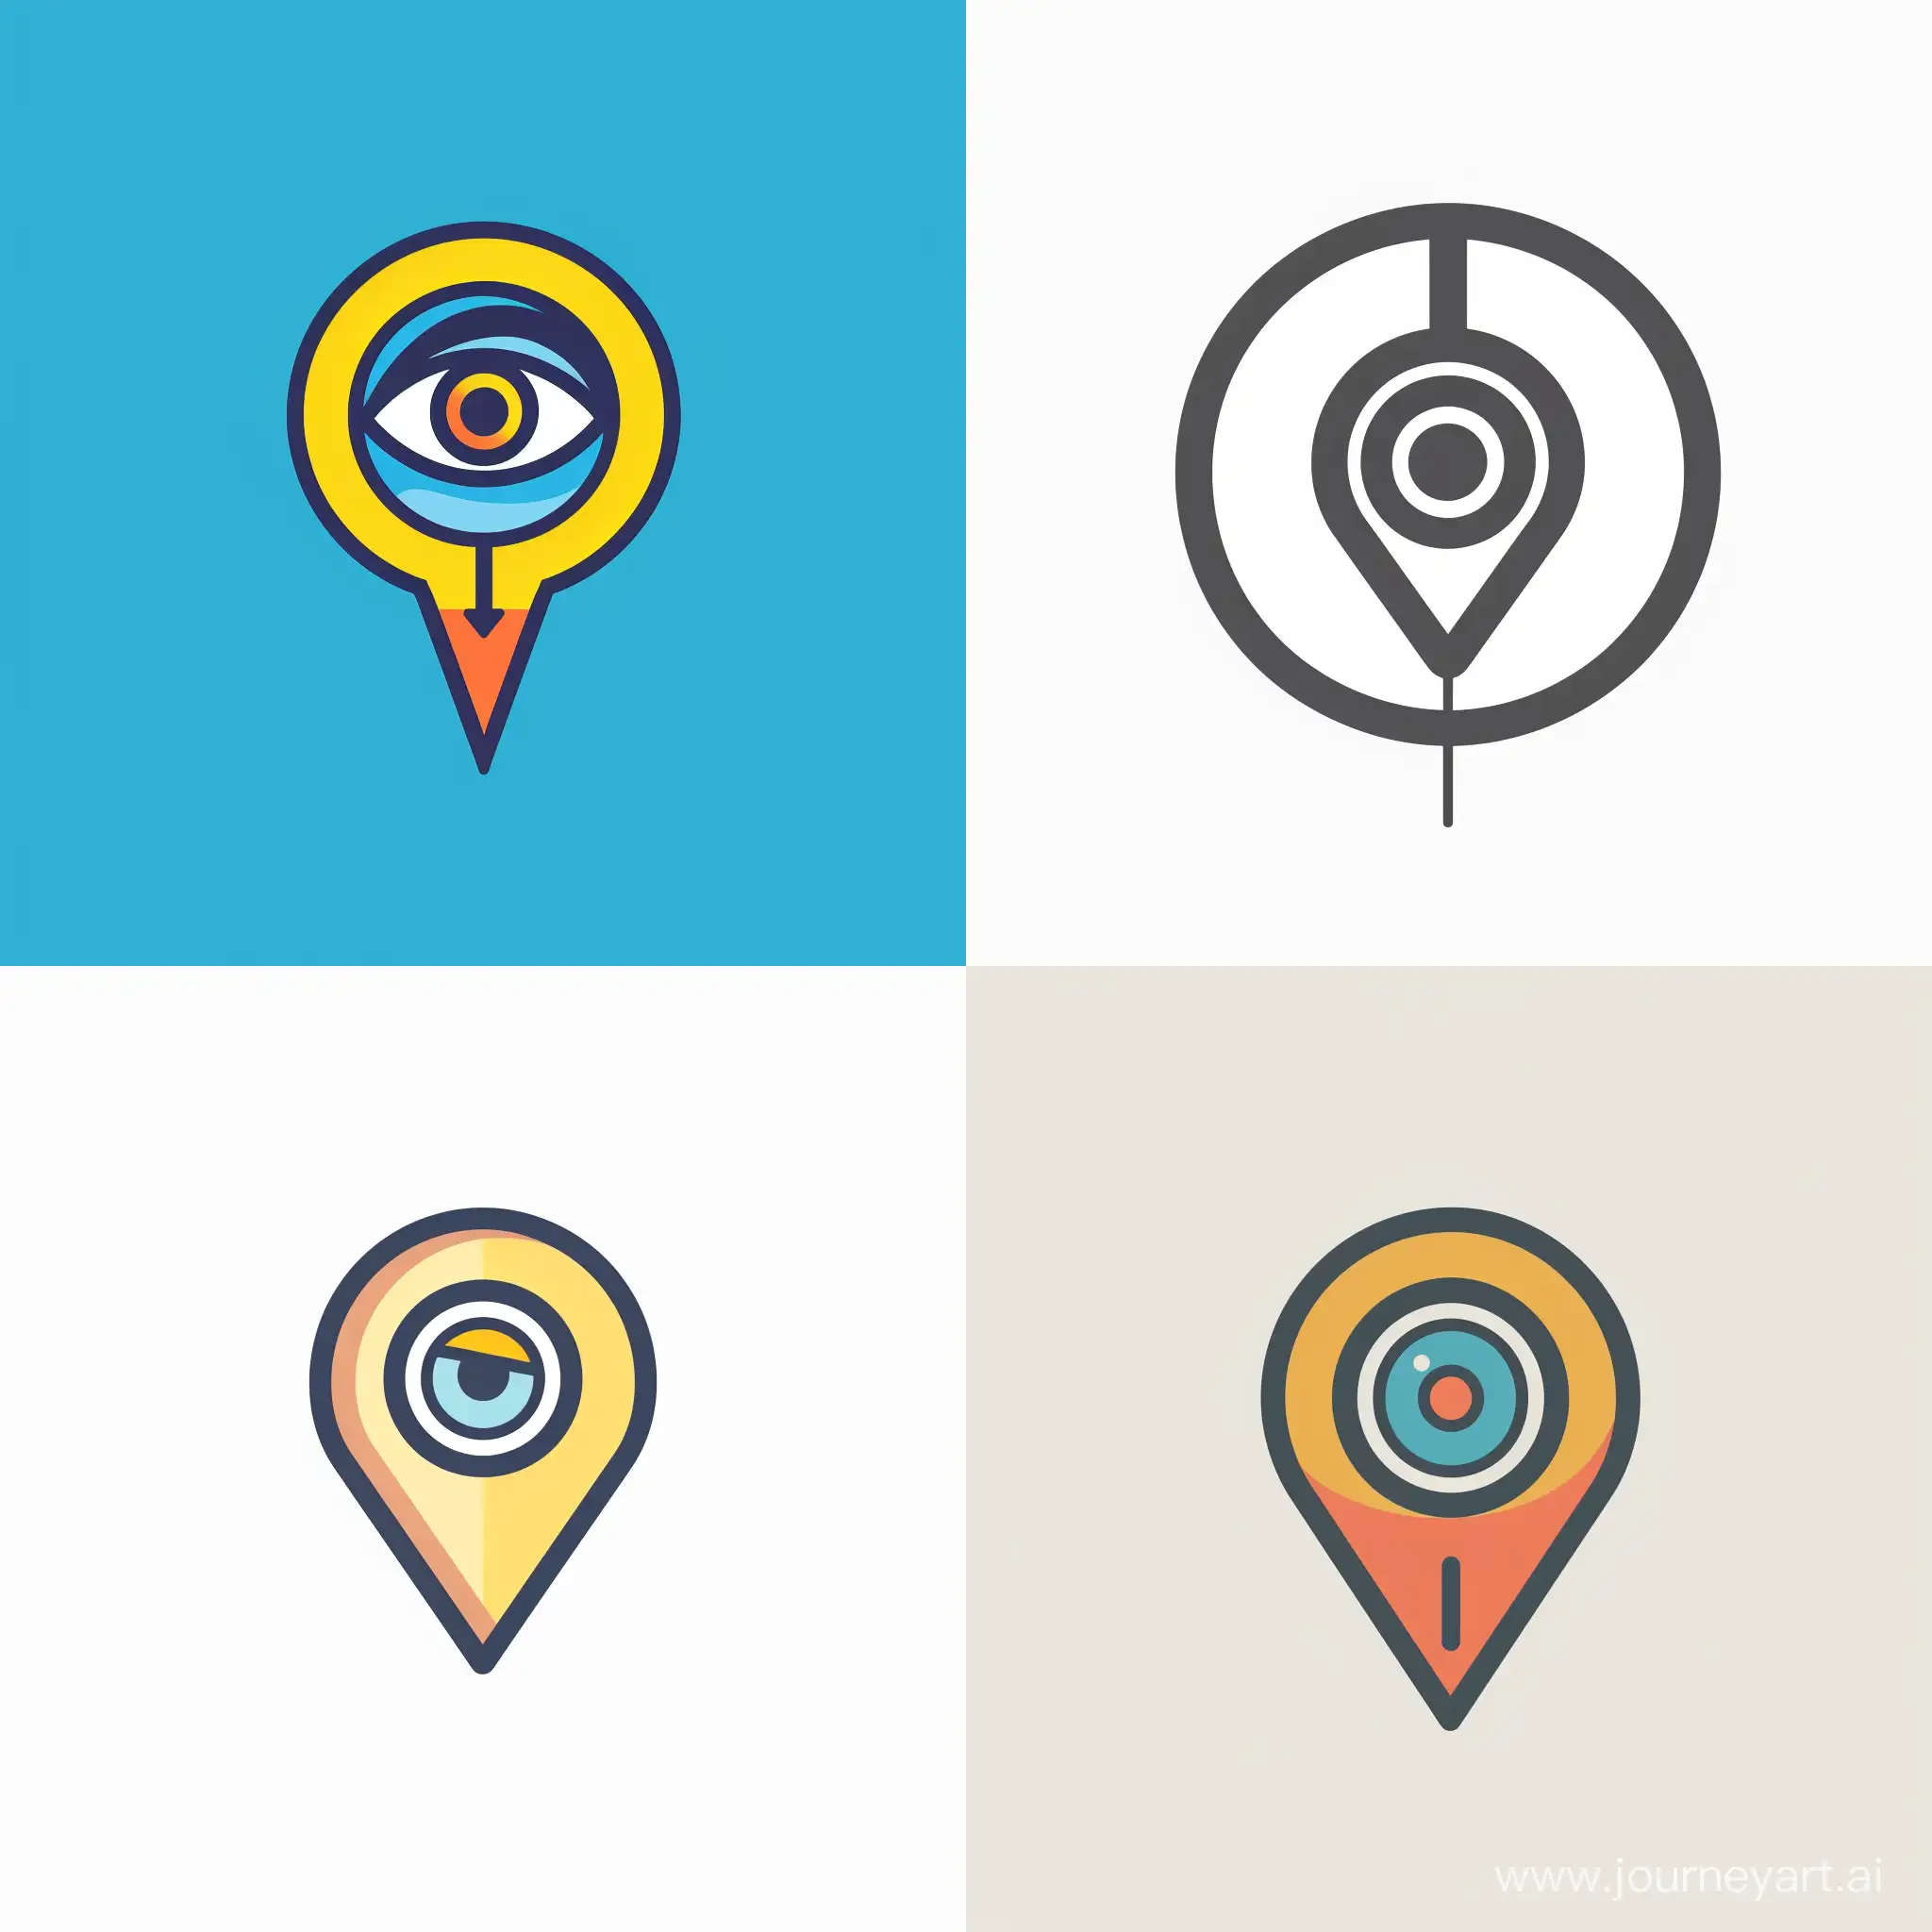 Parcel-Tracking-Logo-Eyecatching-Geo-Position-Icon-for-Efficient-Package-Monitoring